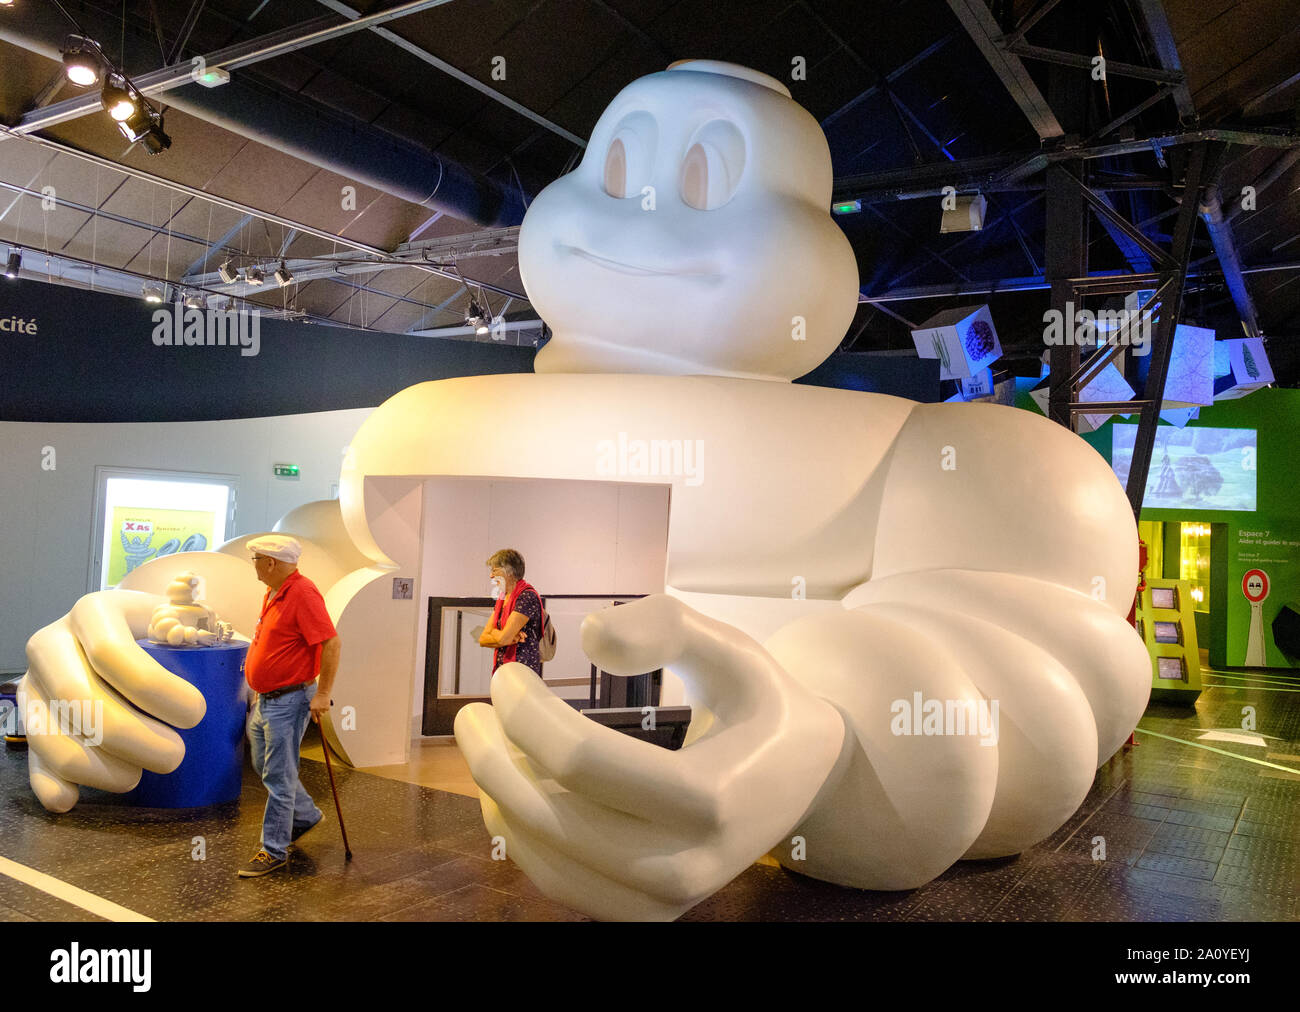 Huge Michelin Tyre Man (bibendum) forming entrance to first floor of L'Aventure Michelin museum in Clermont Ferrand, France Stock Photo